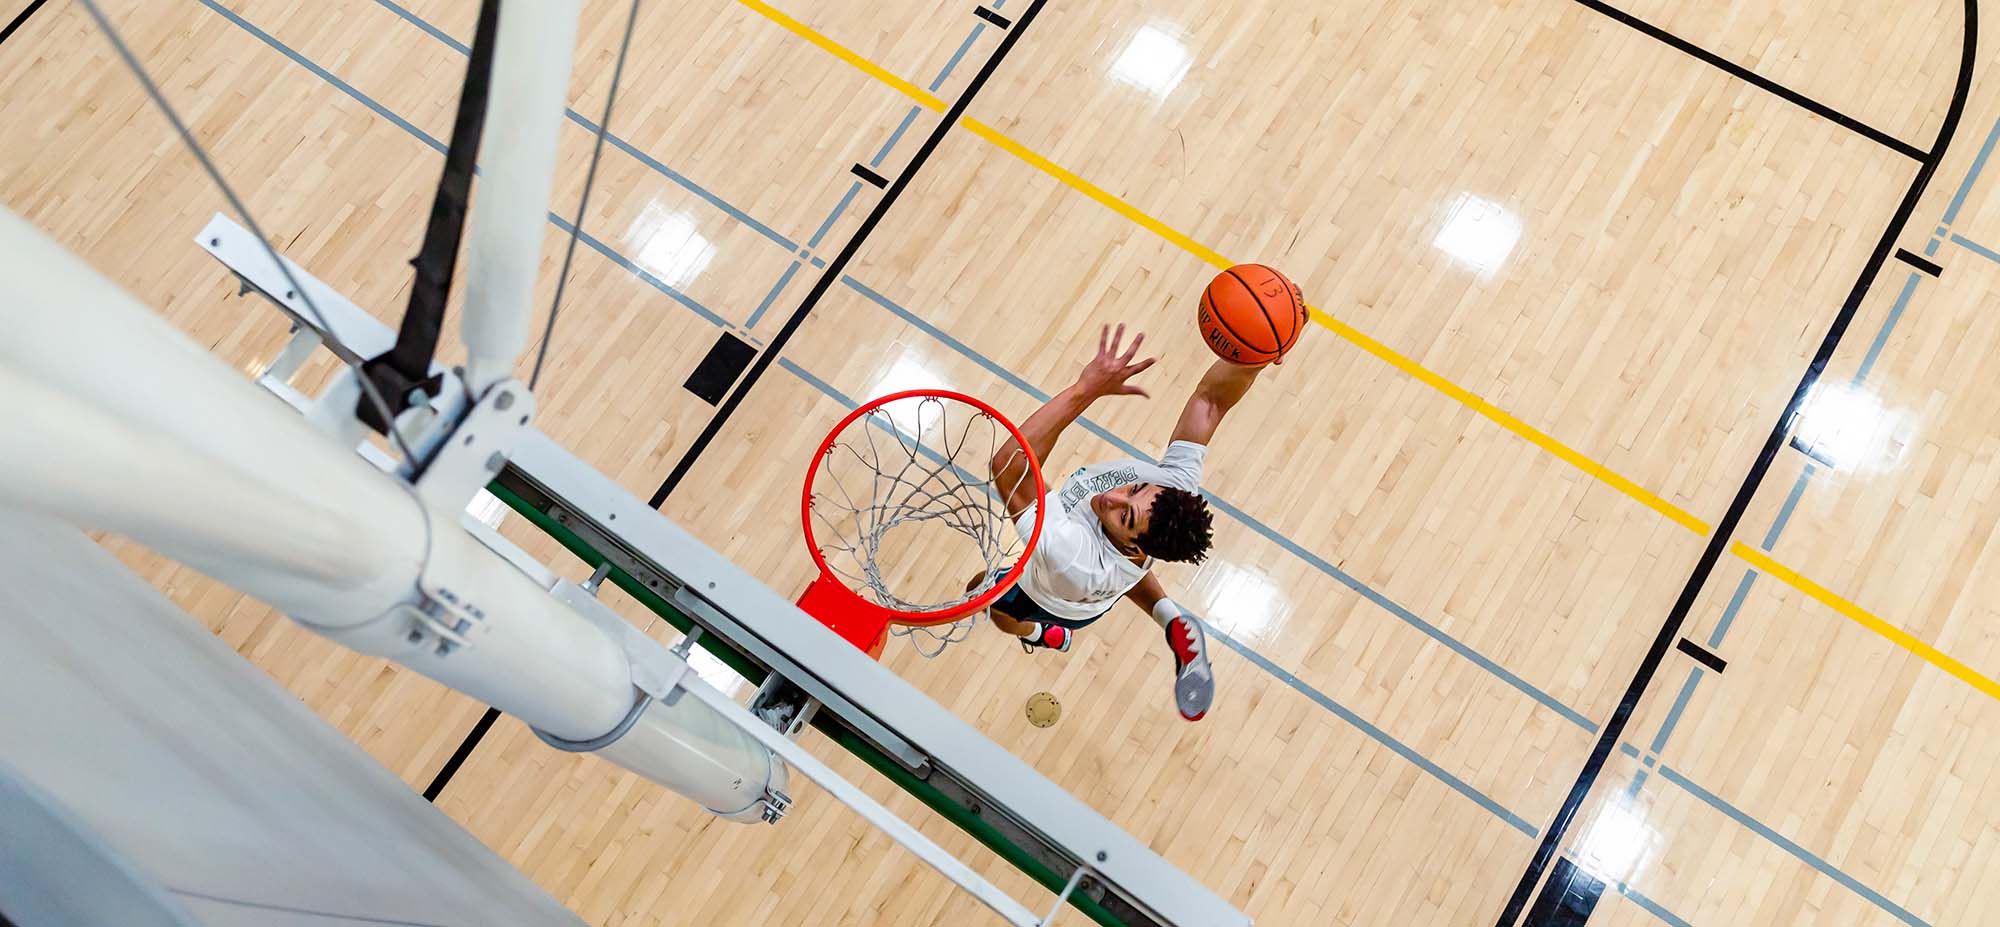 Overhead view of person dunking a basketball in the net